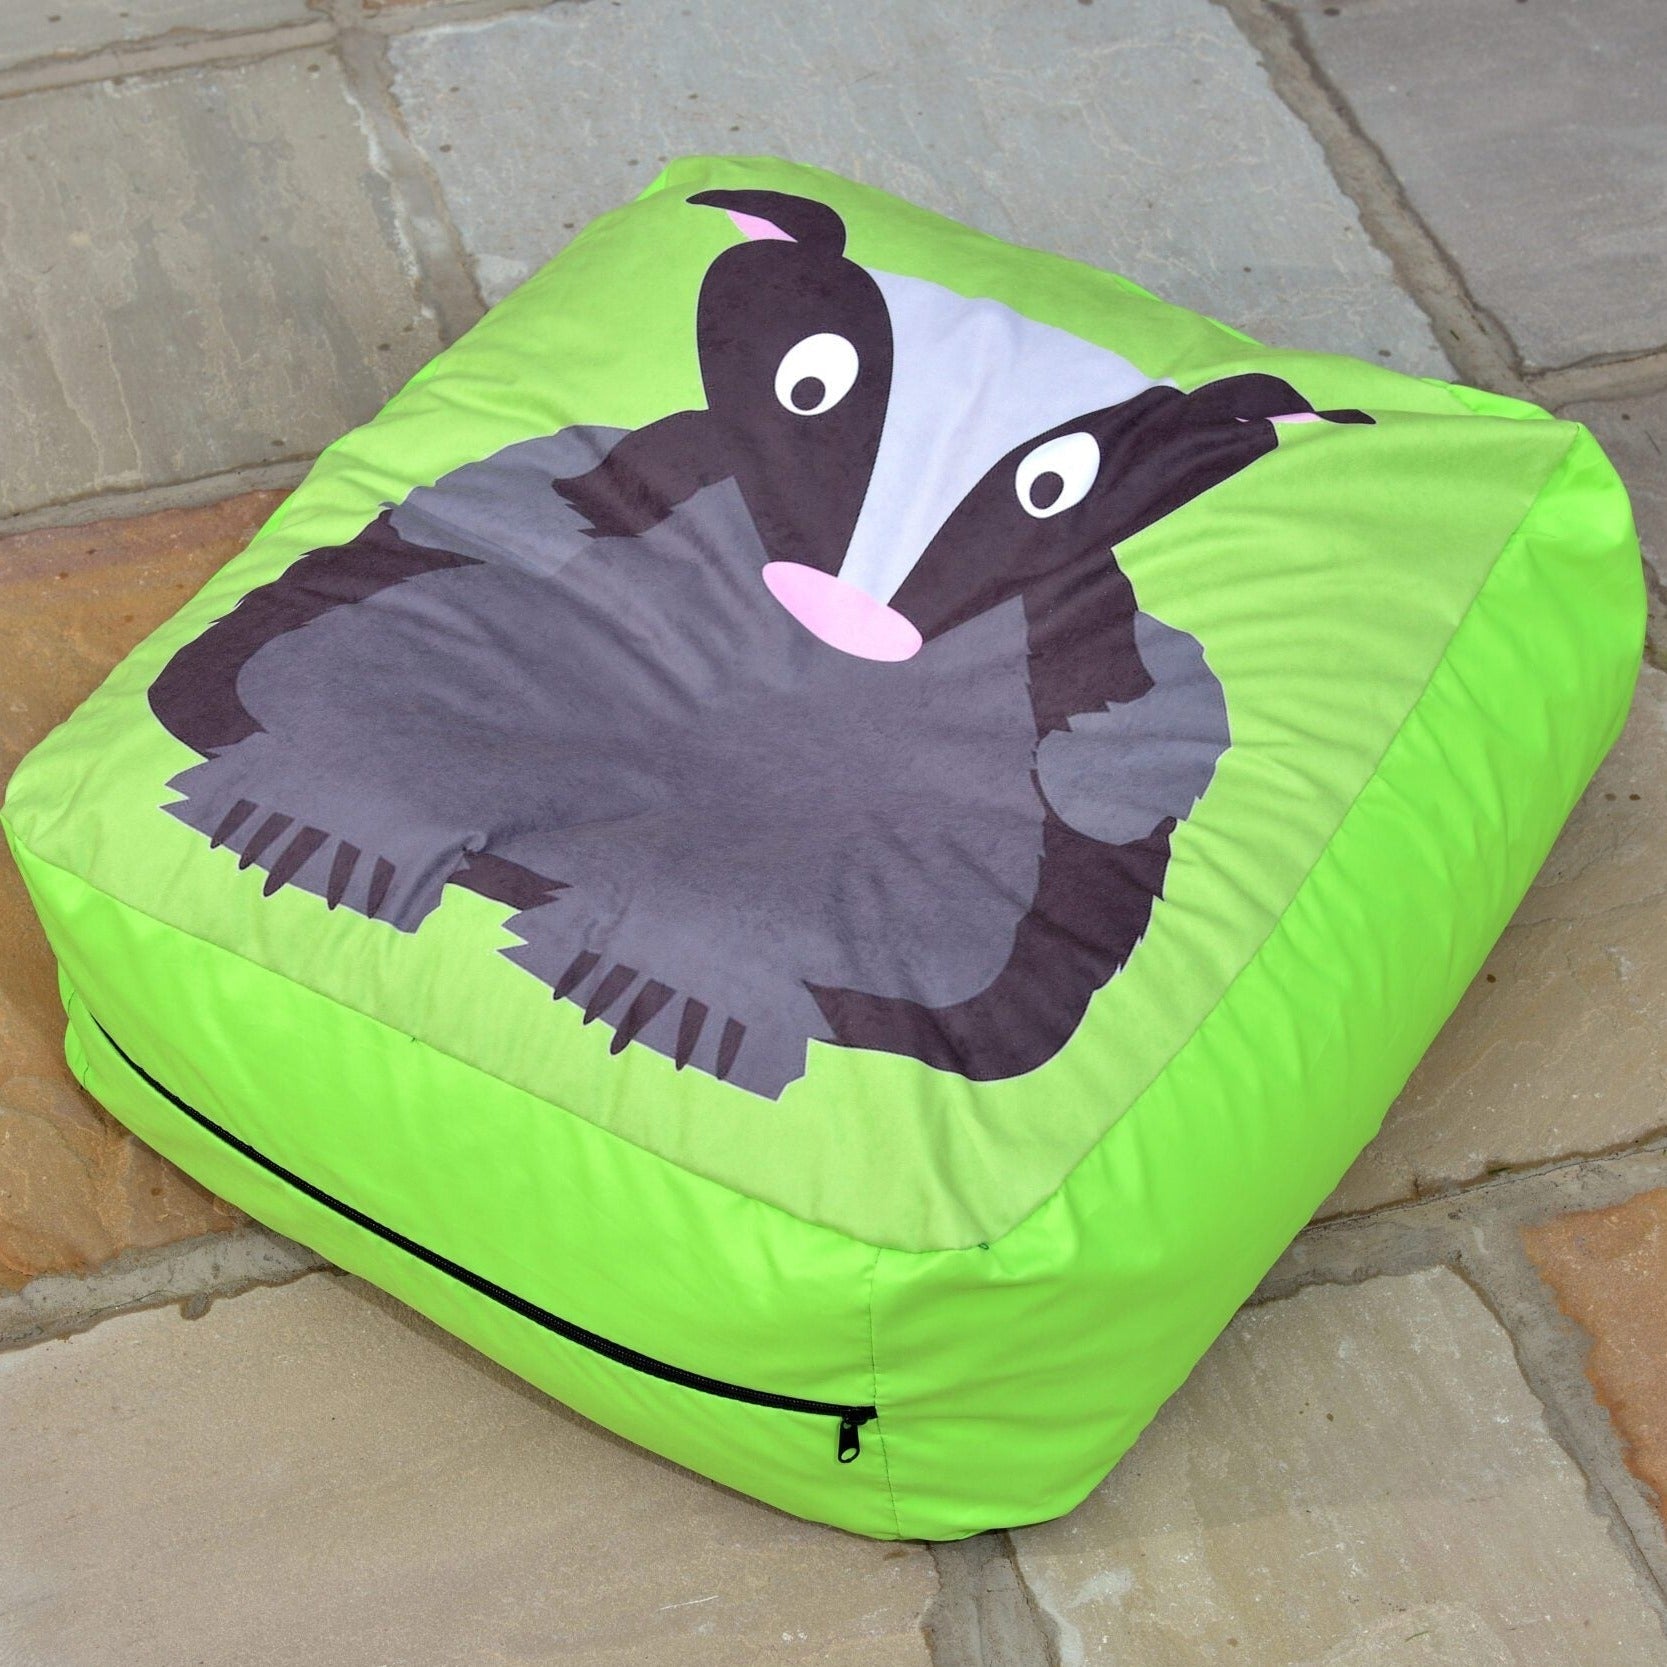 Badger Outdoor and Indoor Bean Cushion, The Badger Outdoor and Indoor Bean Cushion is perfect for use both indoors and outdoors depicting a quirky Mole print. Part of the Woodland Creatures Range which also includes Fox, Badger and Mole prints. Top-quality UK manufacturing with high grade fabrics this cushion is durable and can withstand rigorous use. Made from Nylon and Polyester which can be sponged clean with soapy water or the outer fabric removed for washing at 40°C. Badger Outdoor and Indoor Bean Cush